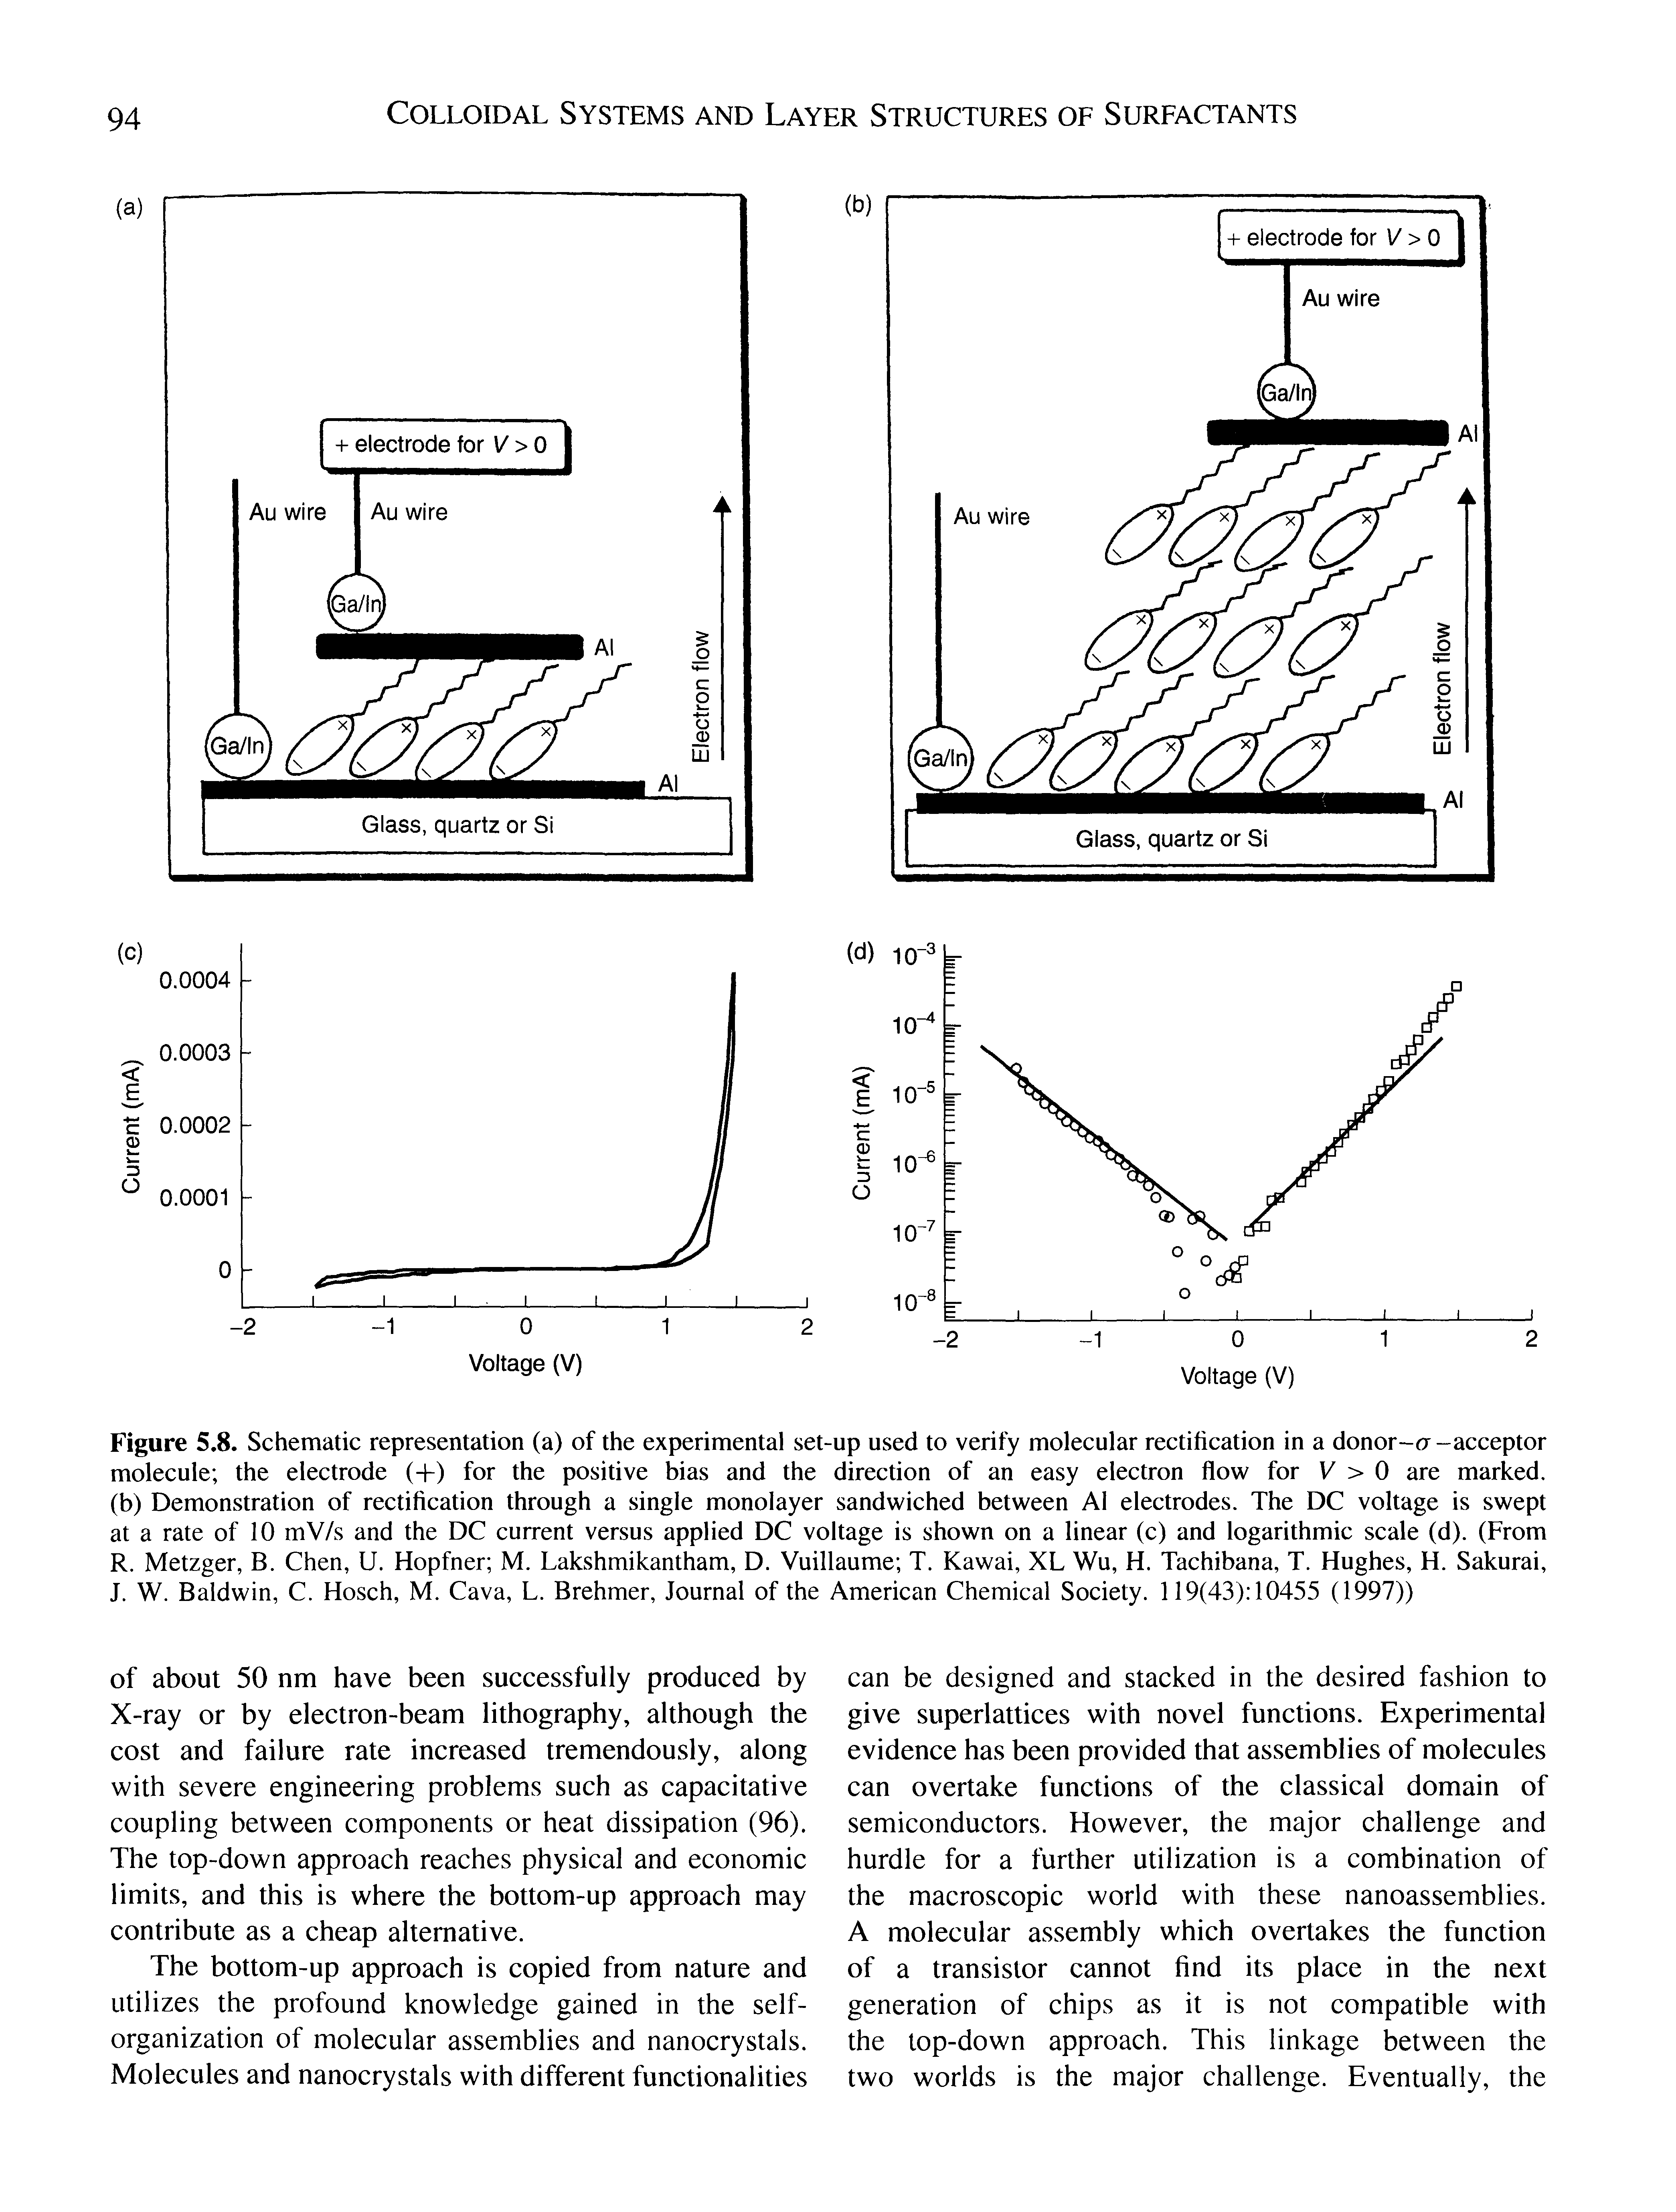 Figure 5.8. Schematic representation (a) of the experimental set-up used to verify molecular rectification in a donor-rr -acceptor molecule the electrode (-h) for the positive bias and the direction of an easy electron flow for V > 0 are marked, (b) Demonstration of rectification through a single monolayer sandwiched between AI electrodes. The DC voltage is swept at a rate of 10 mV/s and the DC current versus applied DC voltage is shown on a linear (c) and logarithmic scale (d). (From R. Metzger, B. Chen, U. Hopfner M. Lakshmikantham, D. Vuillaume T. Kawai, XL Wu, H. Tachibana, T. Hughes, H. Sakurai, J. W. Baldwin, C. Hosch, M. Cava, L. Brehmer, Journal of the American Chemical Society. 119(43).T0455 (1997))...